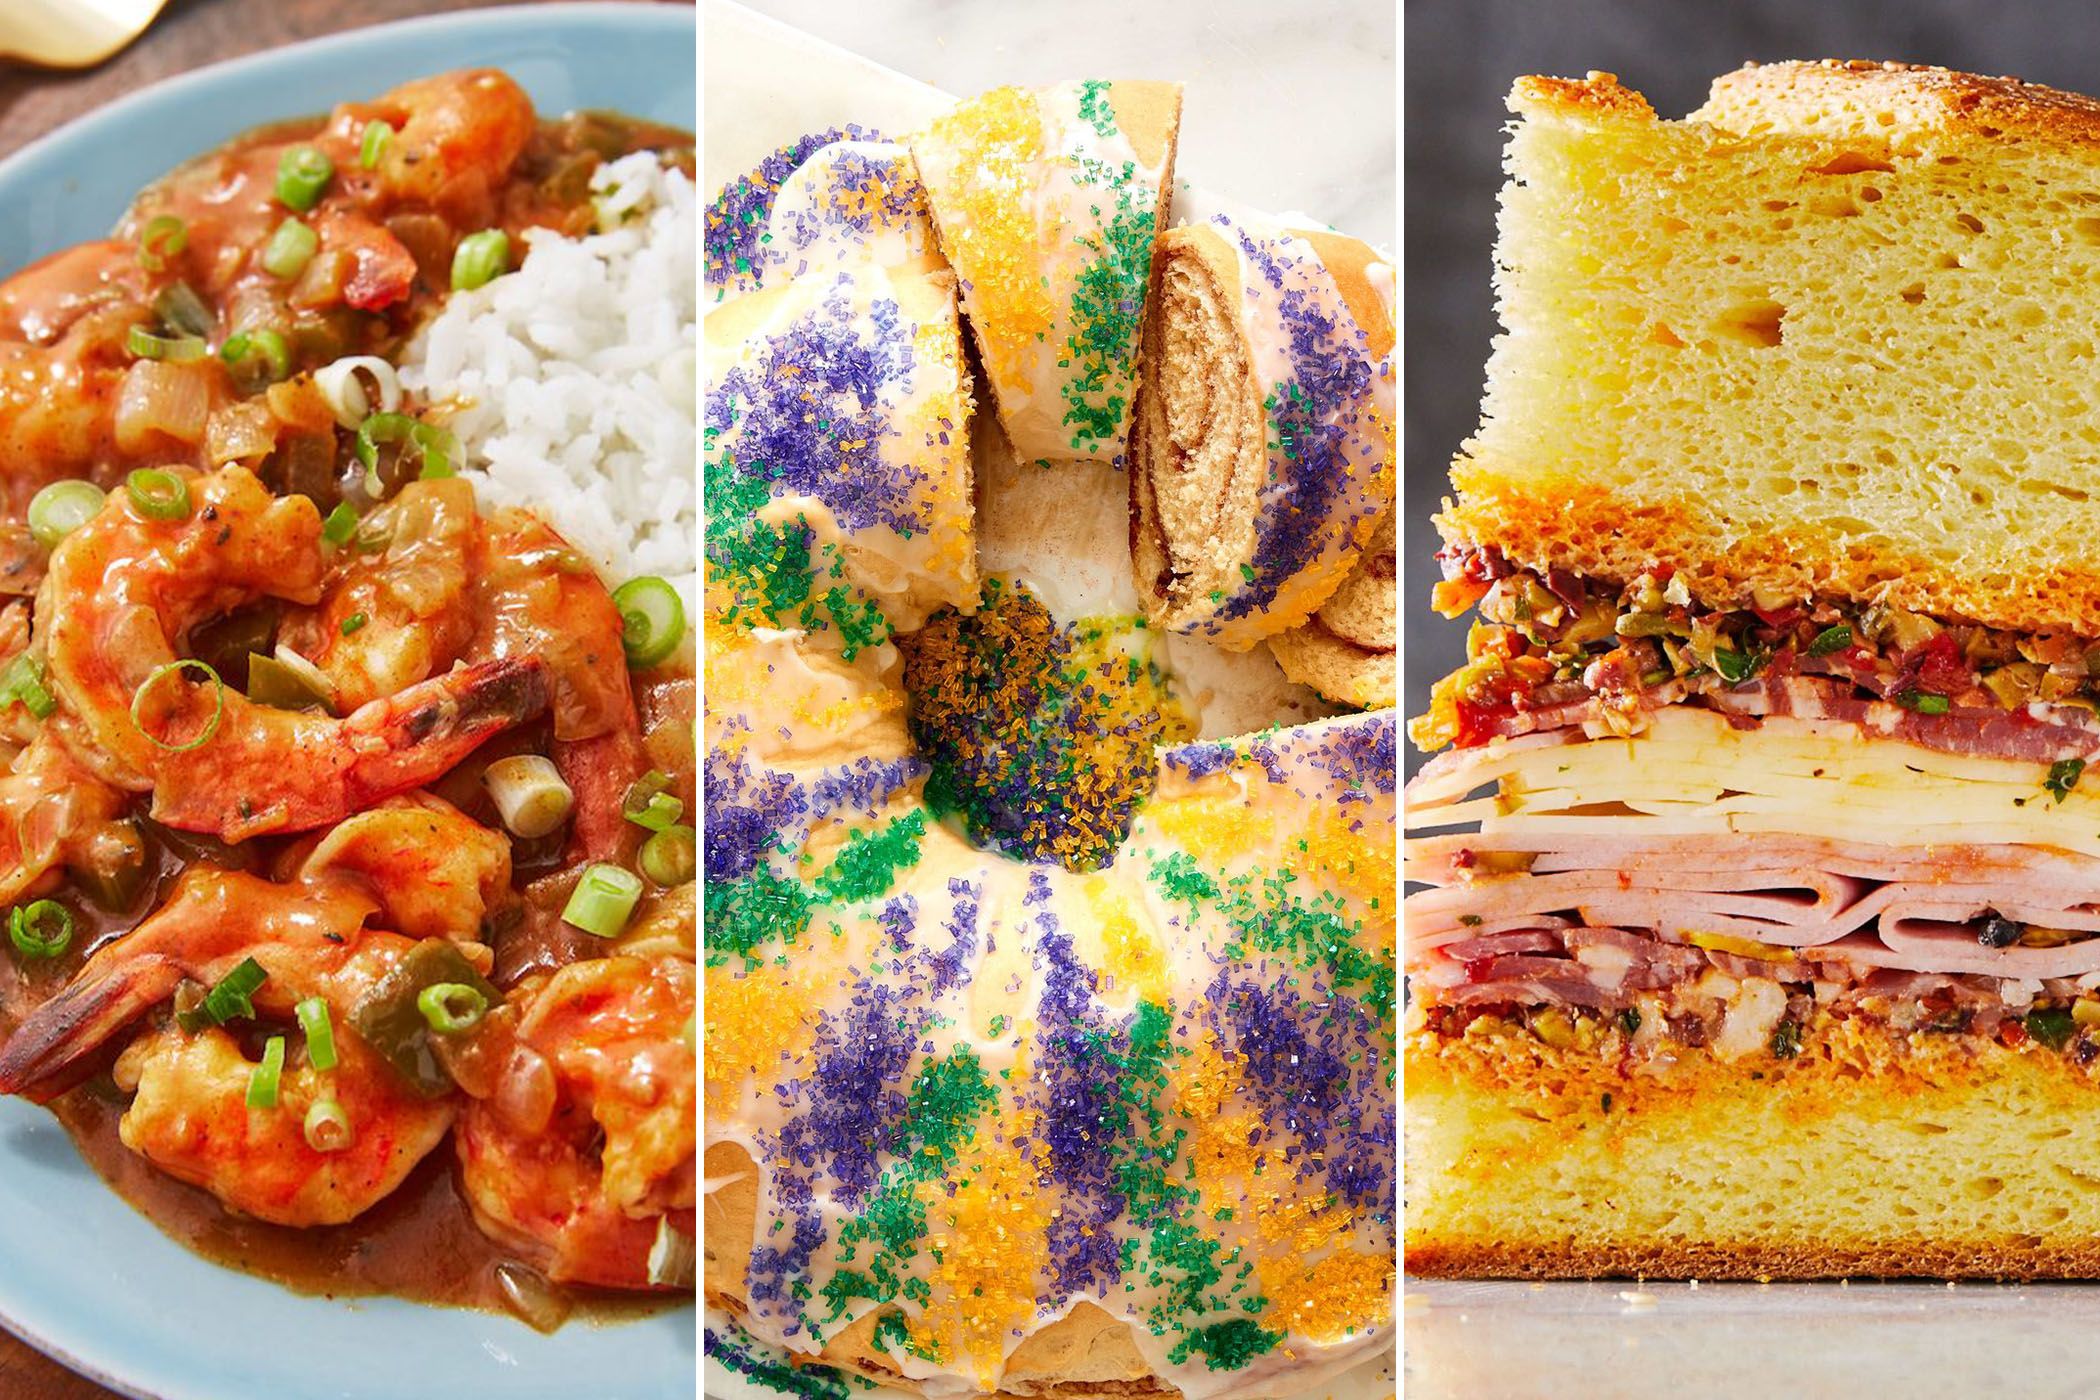 17 Mardi Gras Recipes For Your Party - Brit + Co